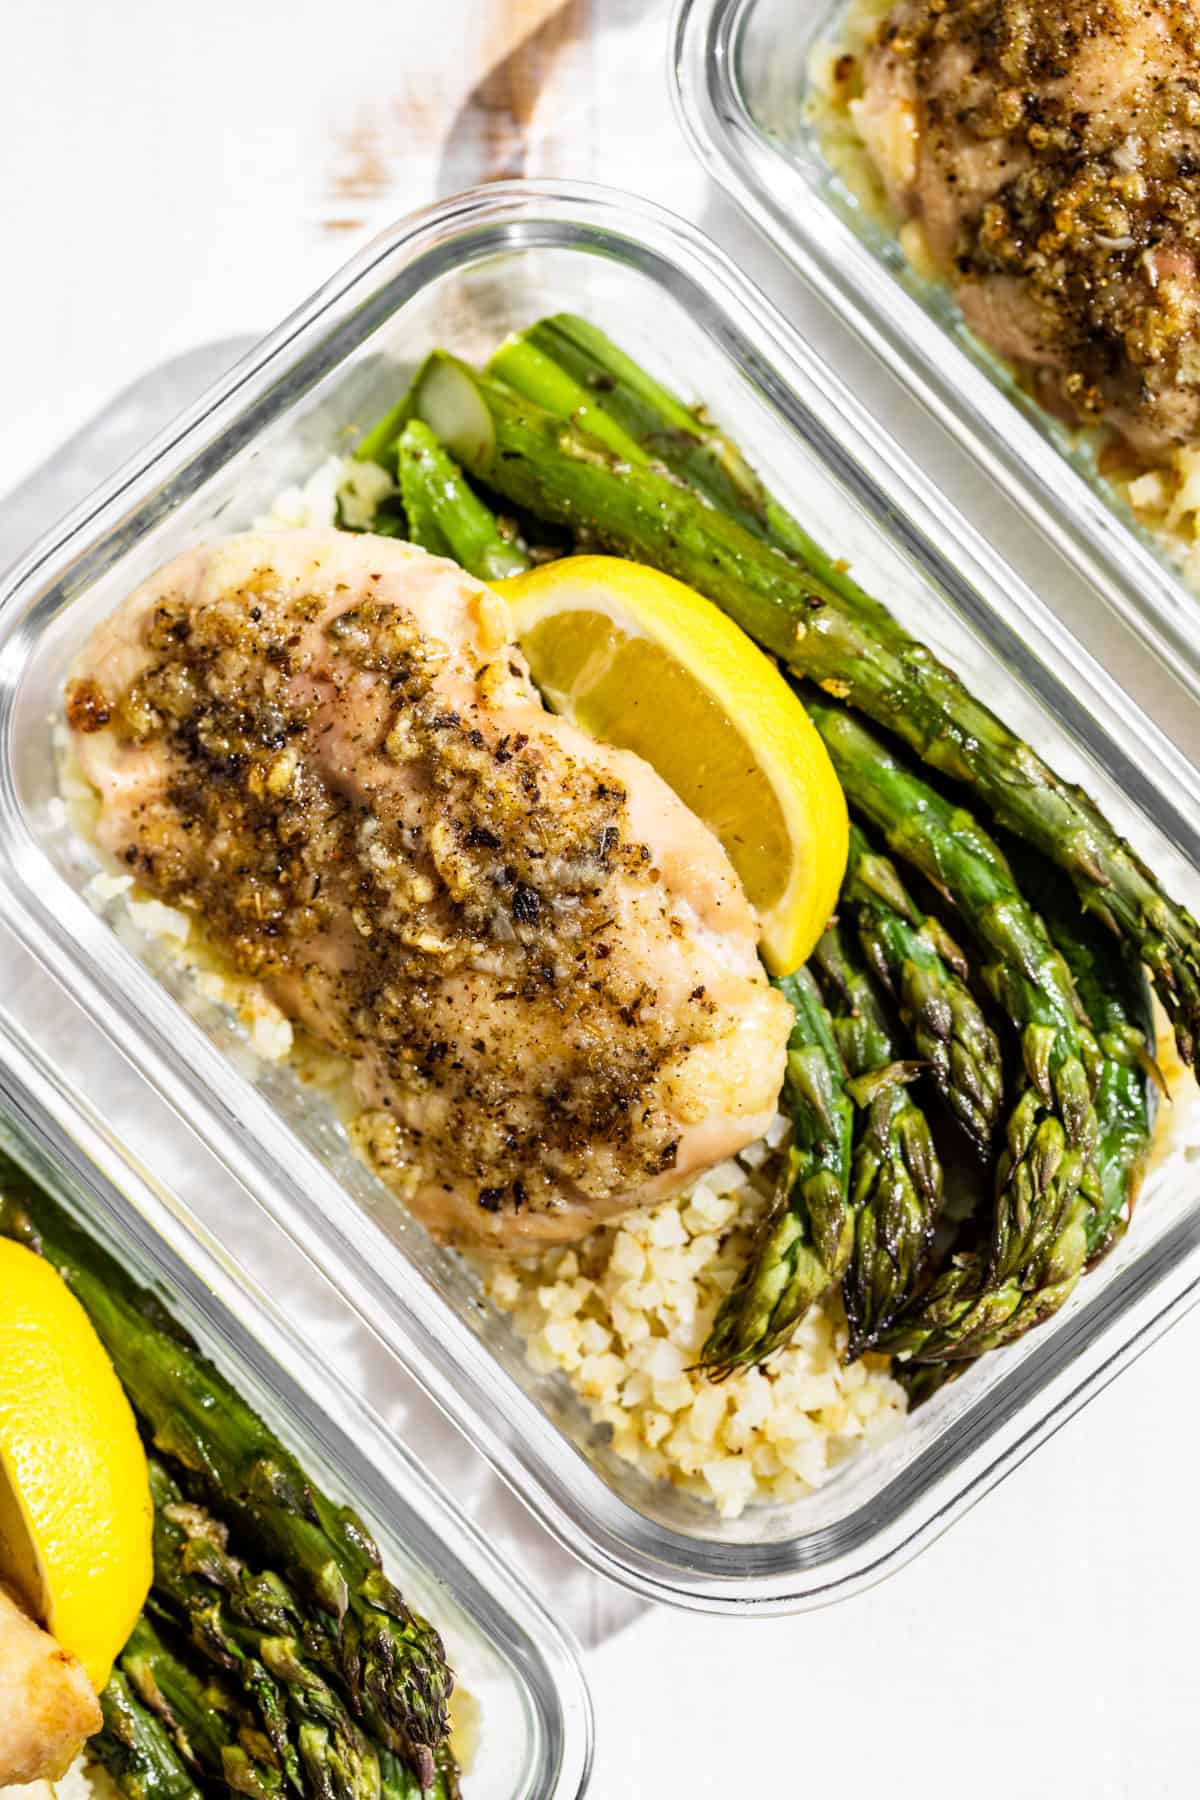 Three clear glass containers with Garlic Herb Chicken, Asparagus, and Cauliflower rice topped with lemon wedges.